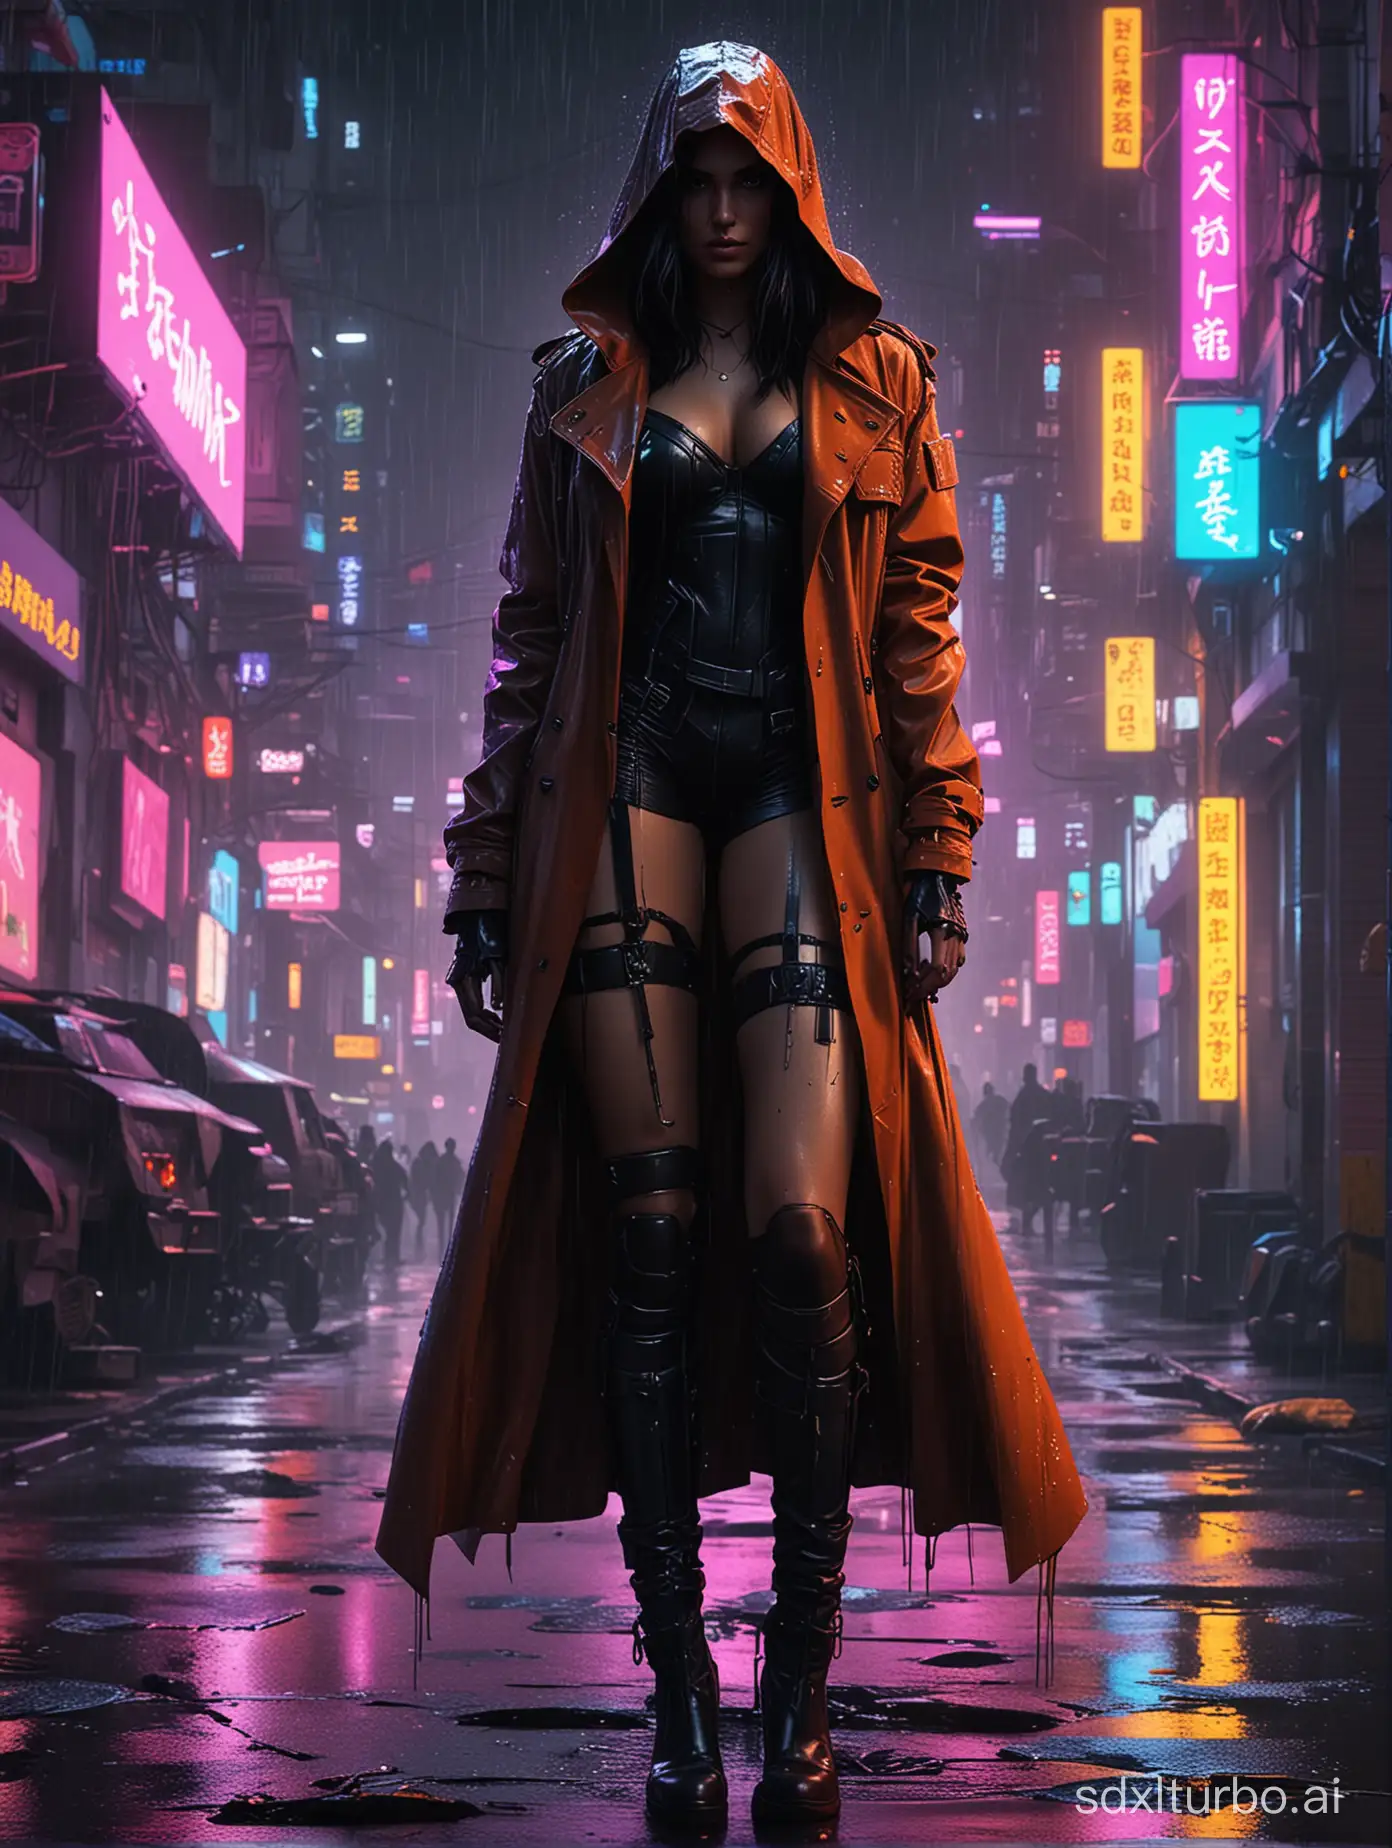 photorealistic cyberpunk city at night, bright neon lights, trash littering the streets, shadowed muscley female character silhouette with long trench coat and hood standing in the middle of a wet street, intense vivid colors